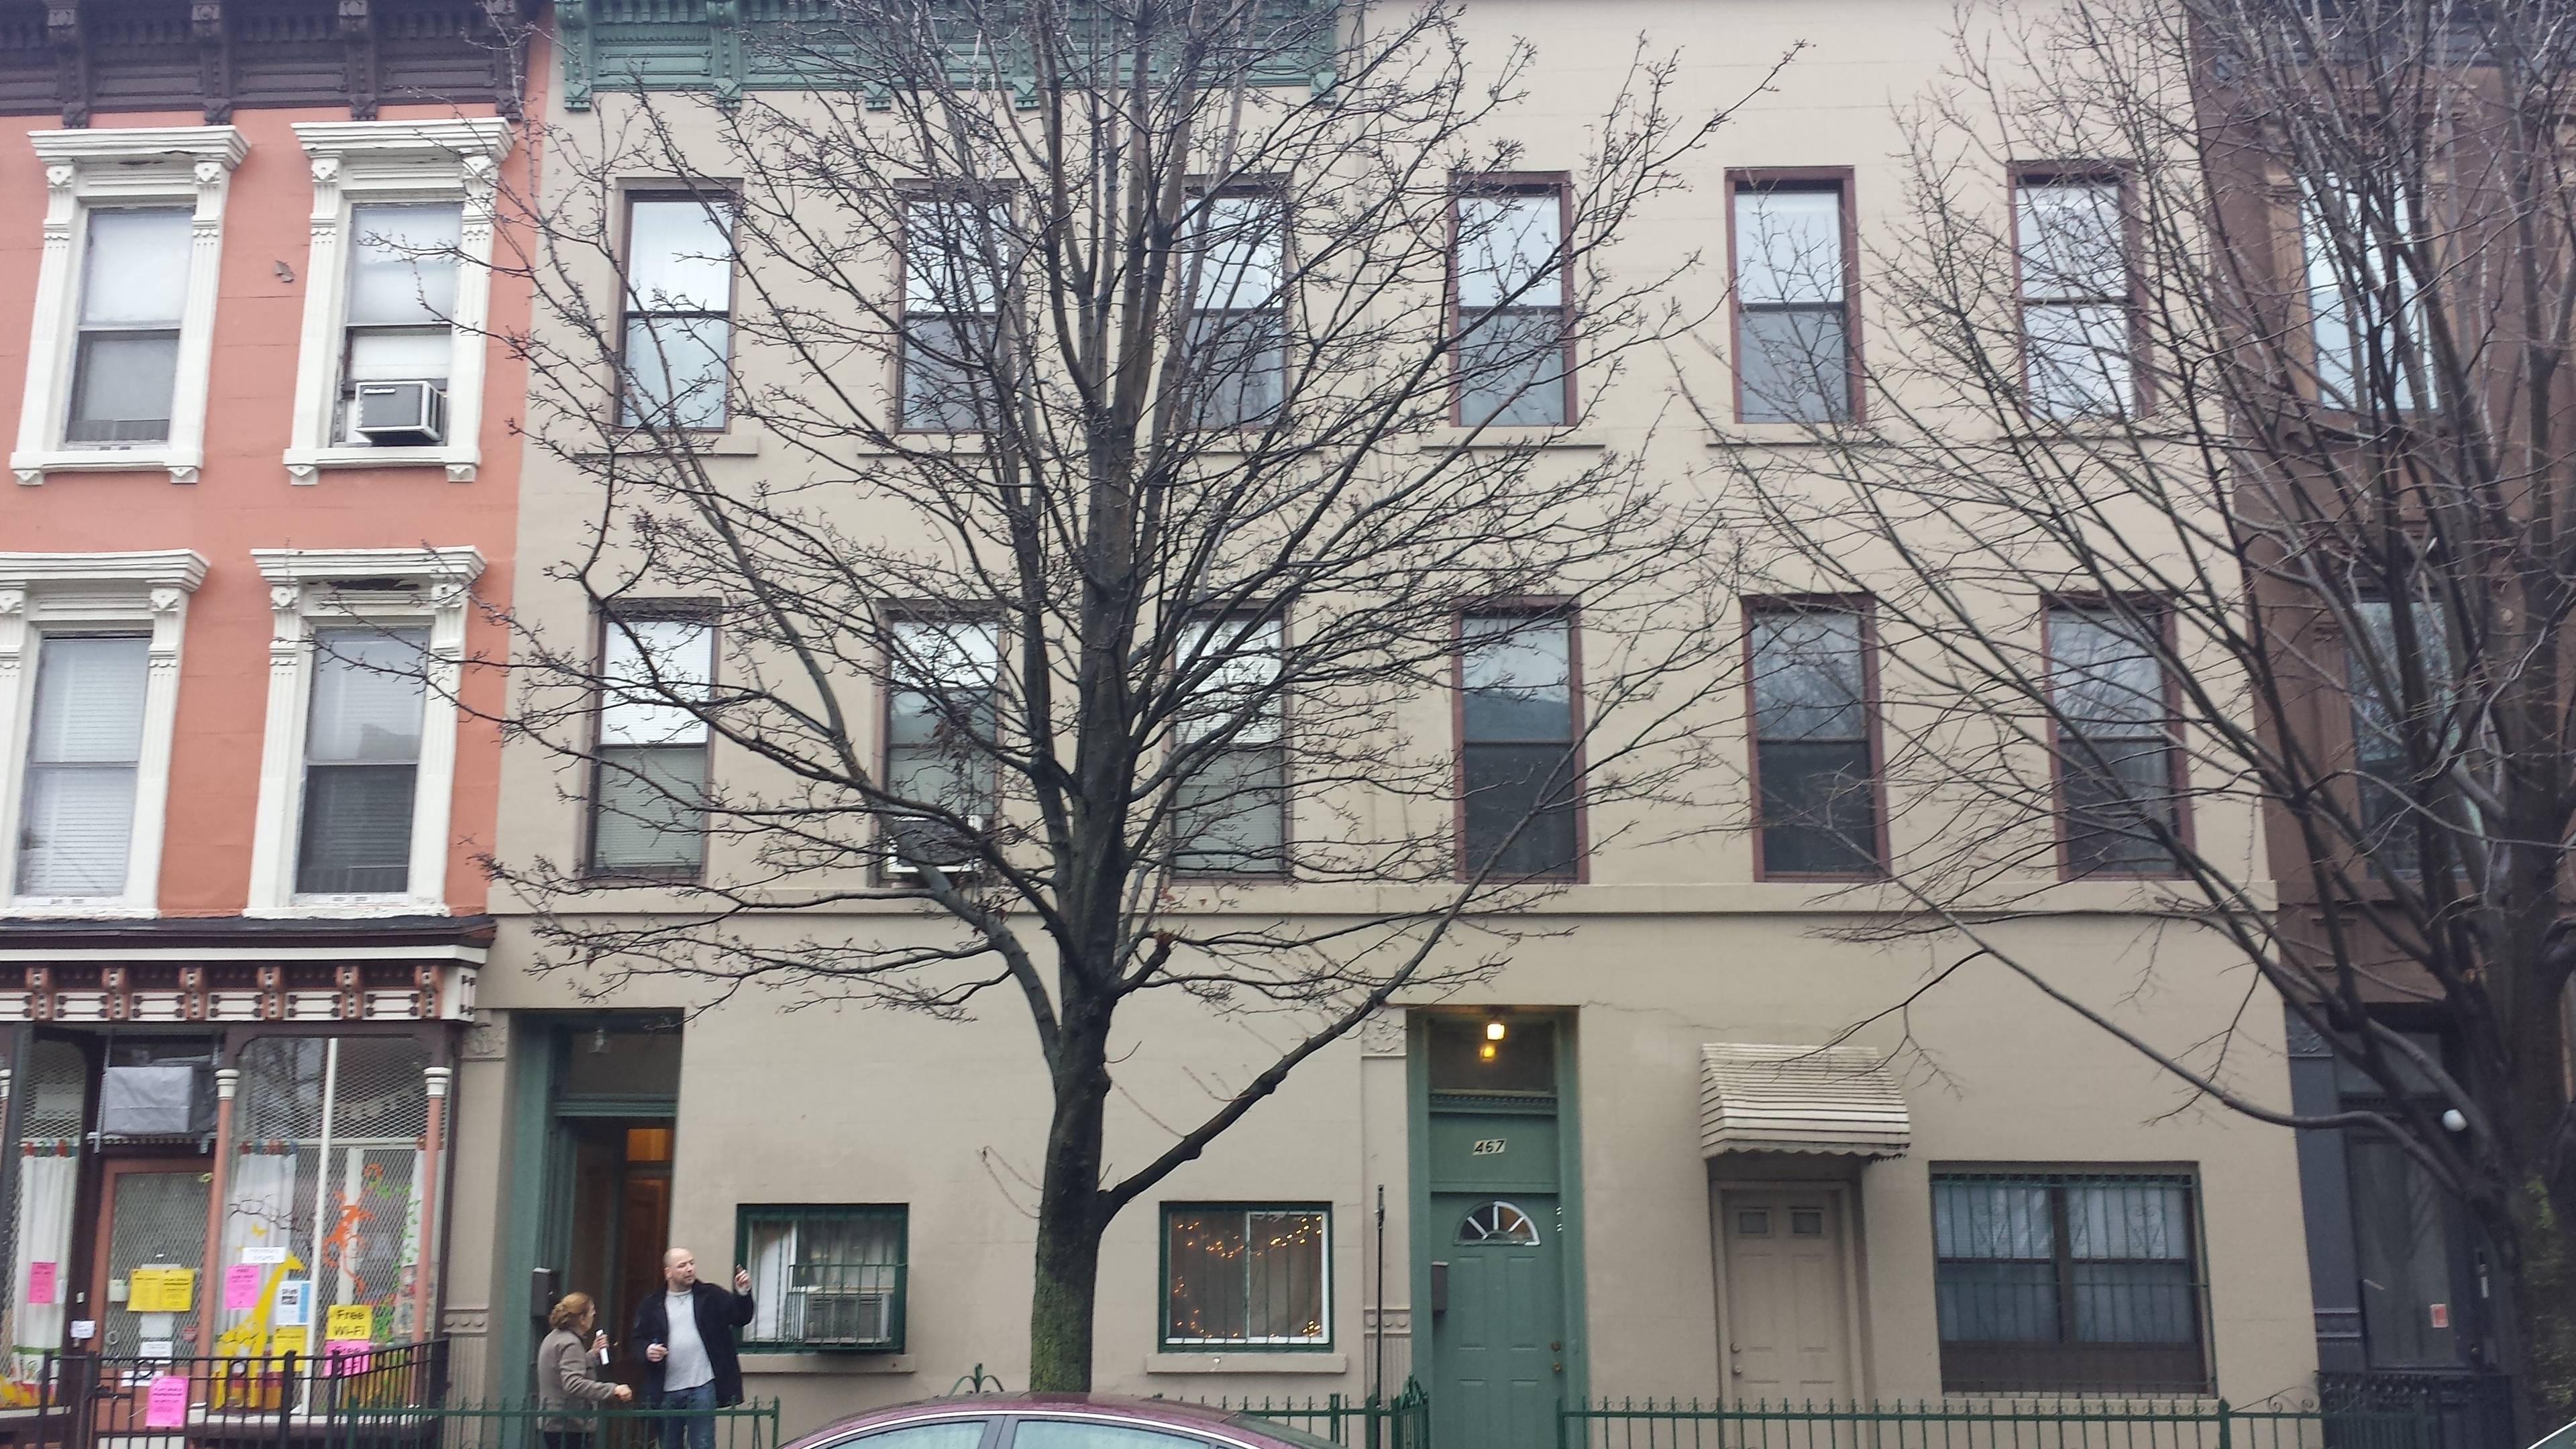 Pre/War Townhome - Park Slope - Brooklyn